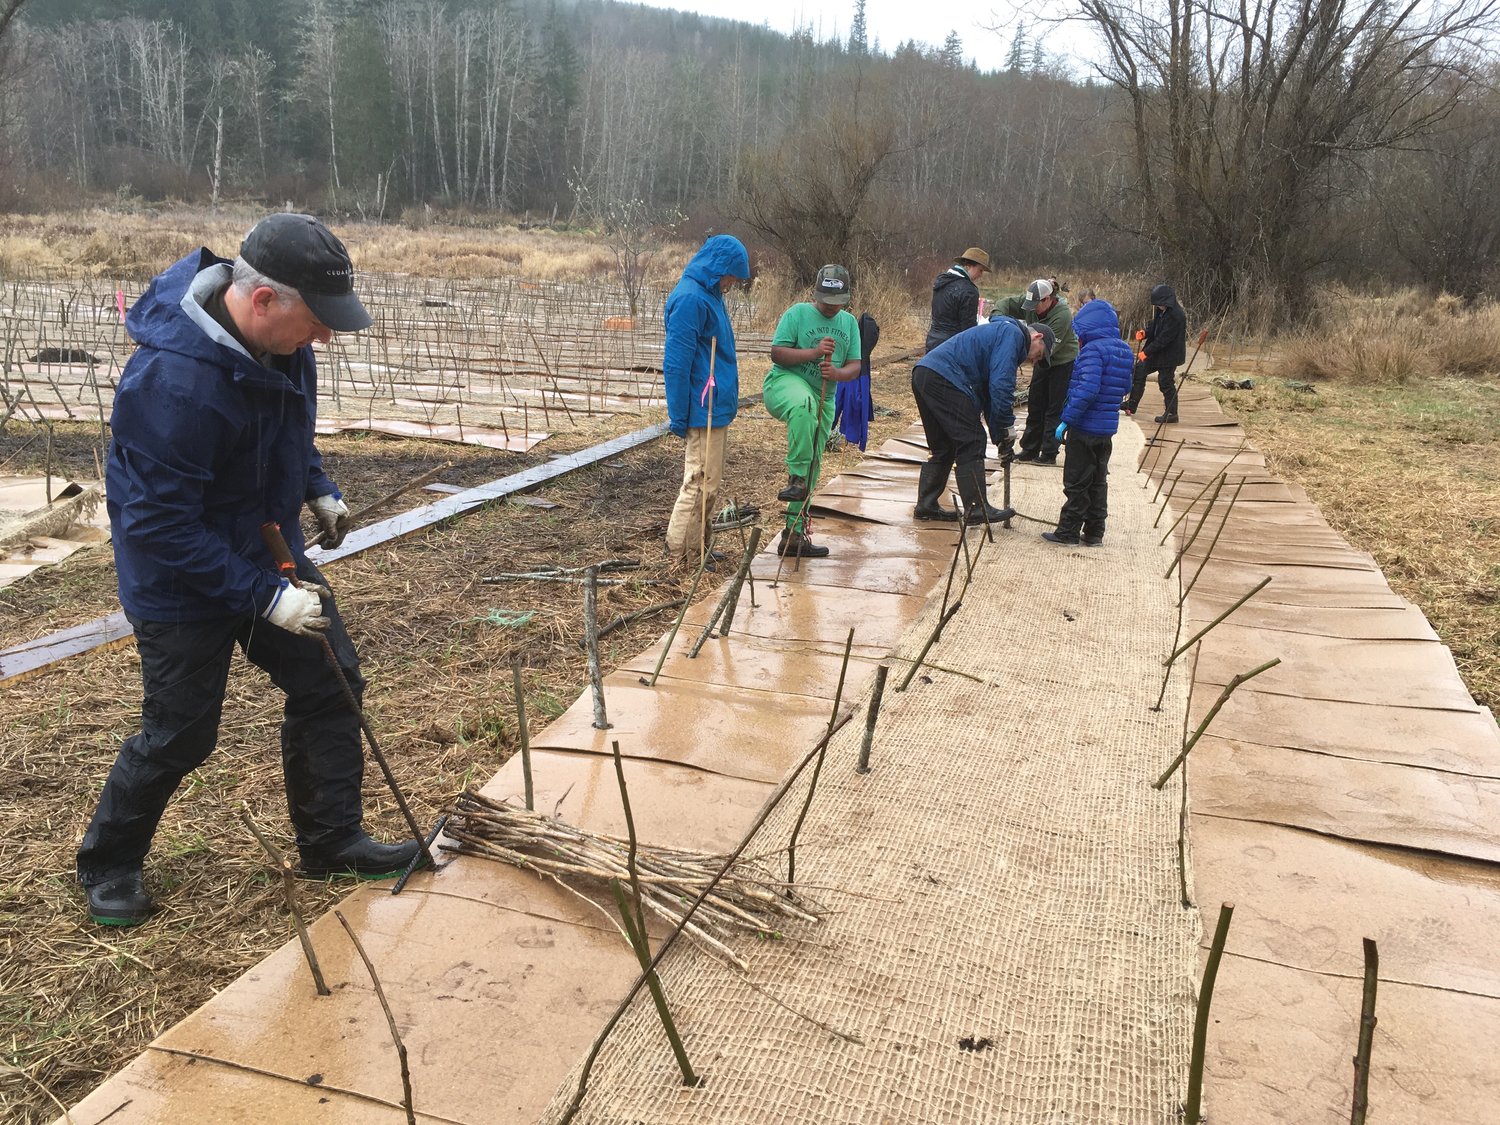 Volunteers plant live stakes in cardboard mulch along Tarboo Creek, looking to restore wetland vegetation impacted by the invasive species of reed canary grass.